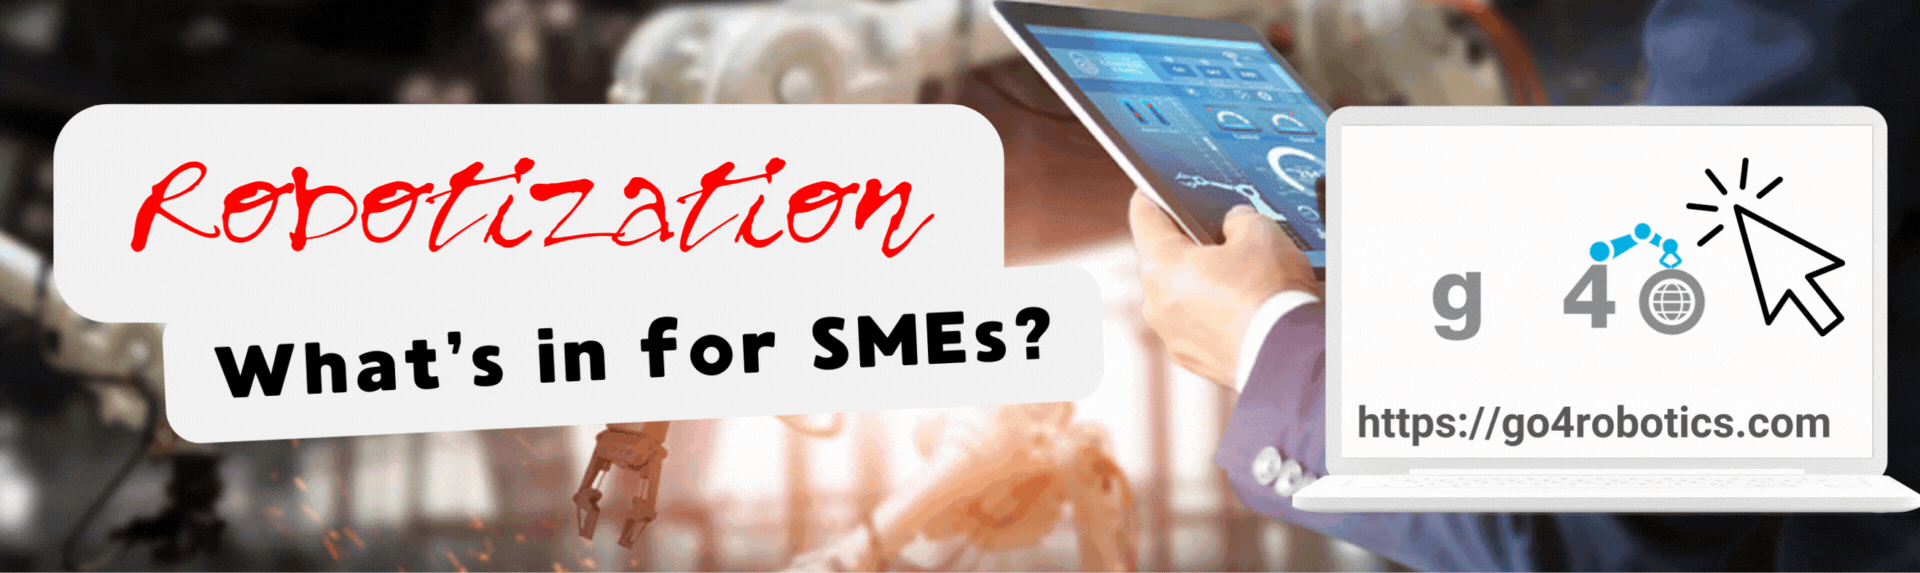 Robotization - What's in for SMEs?